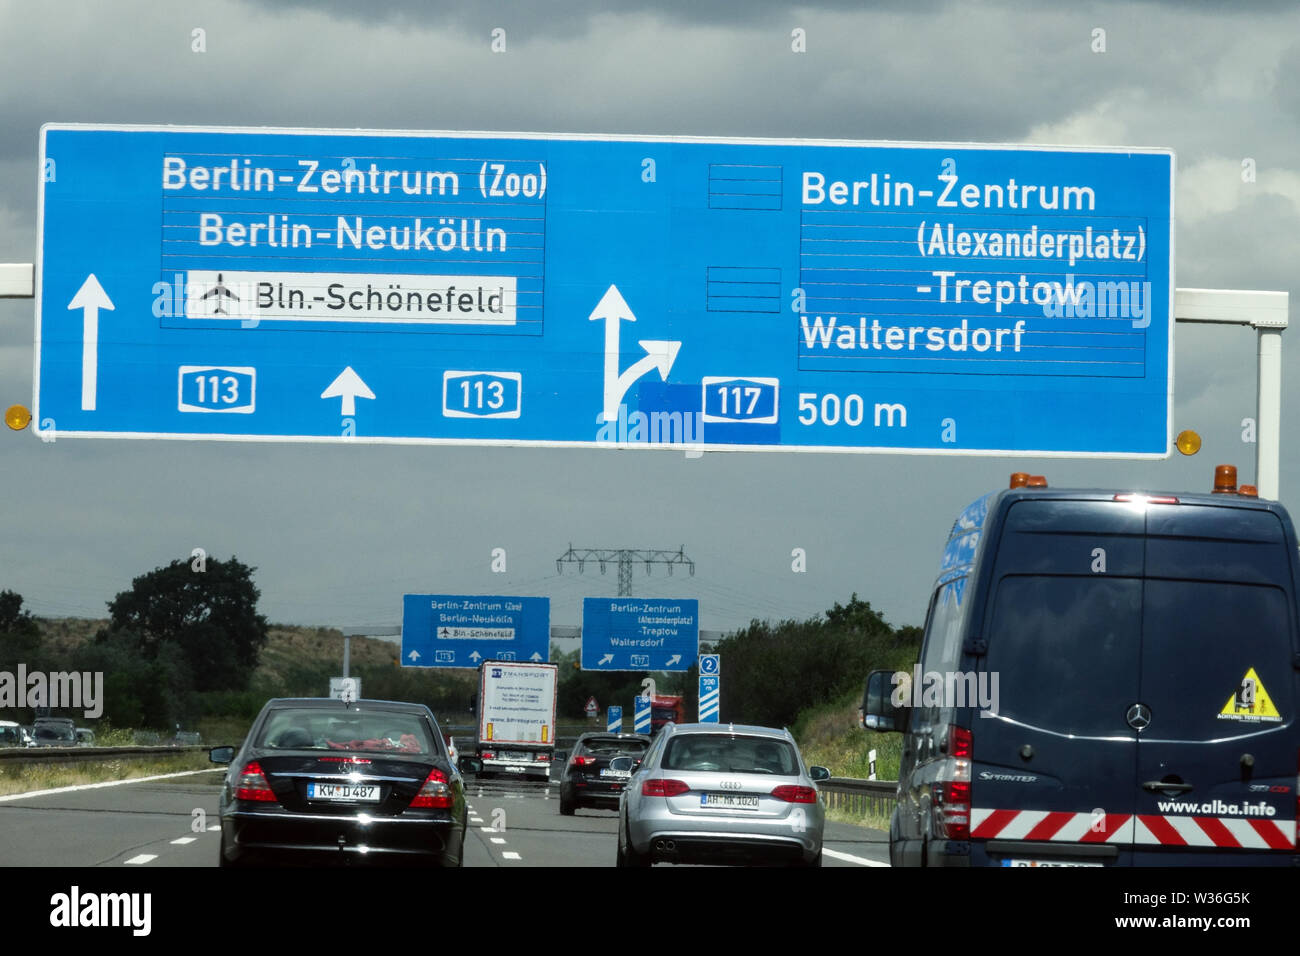 Germany highway sign, traffic multi lane, direction to Berlin Stock Photo